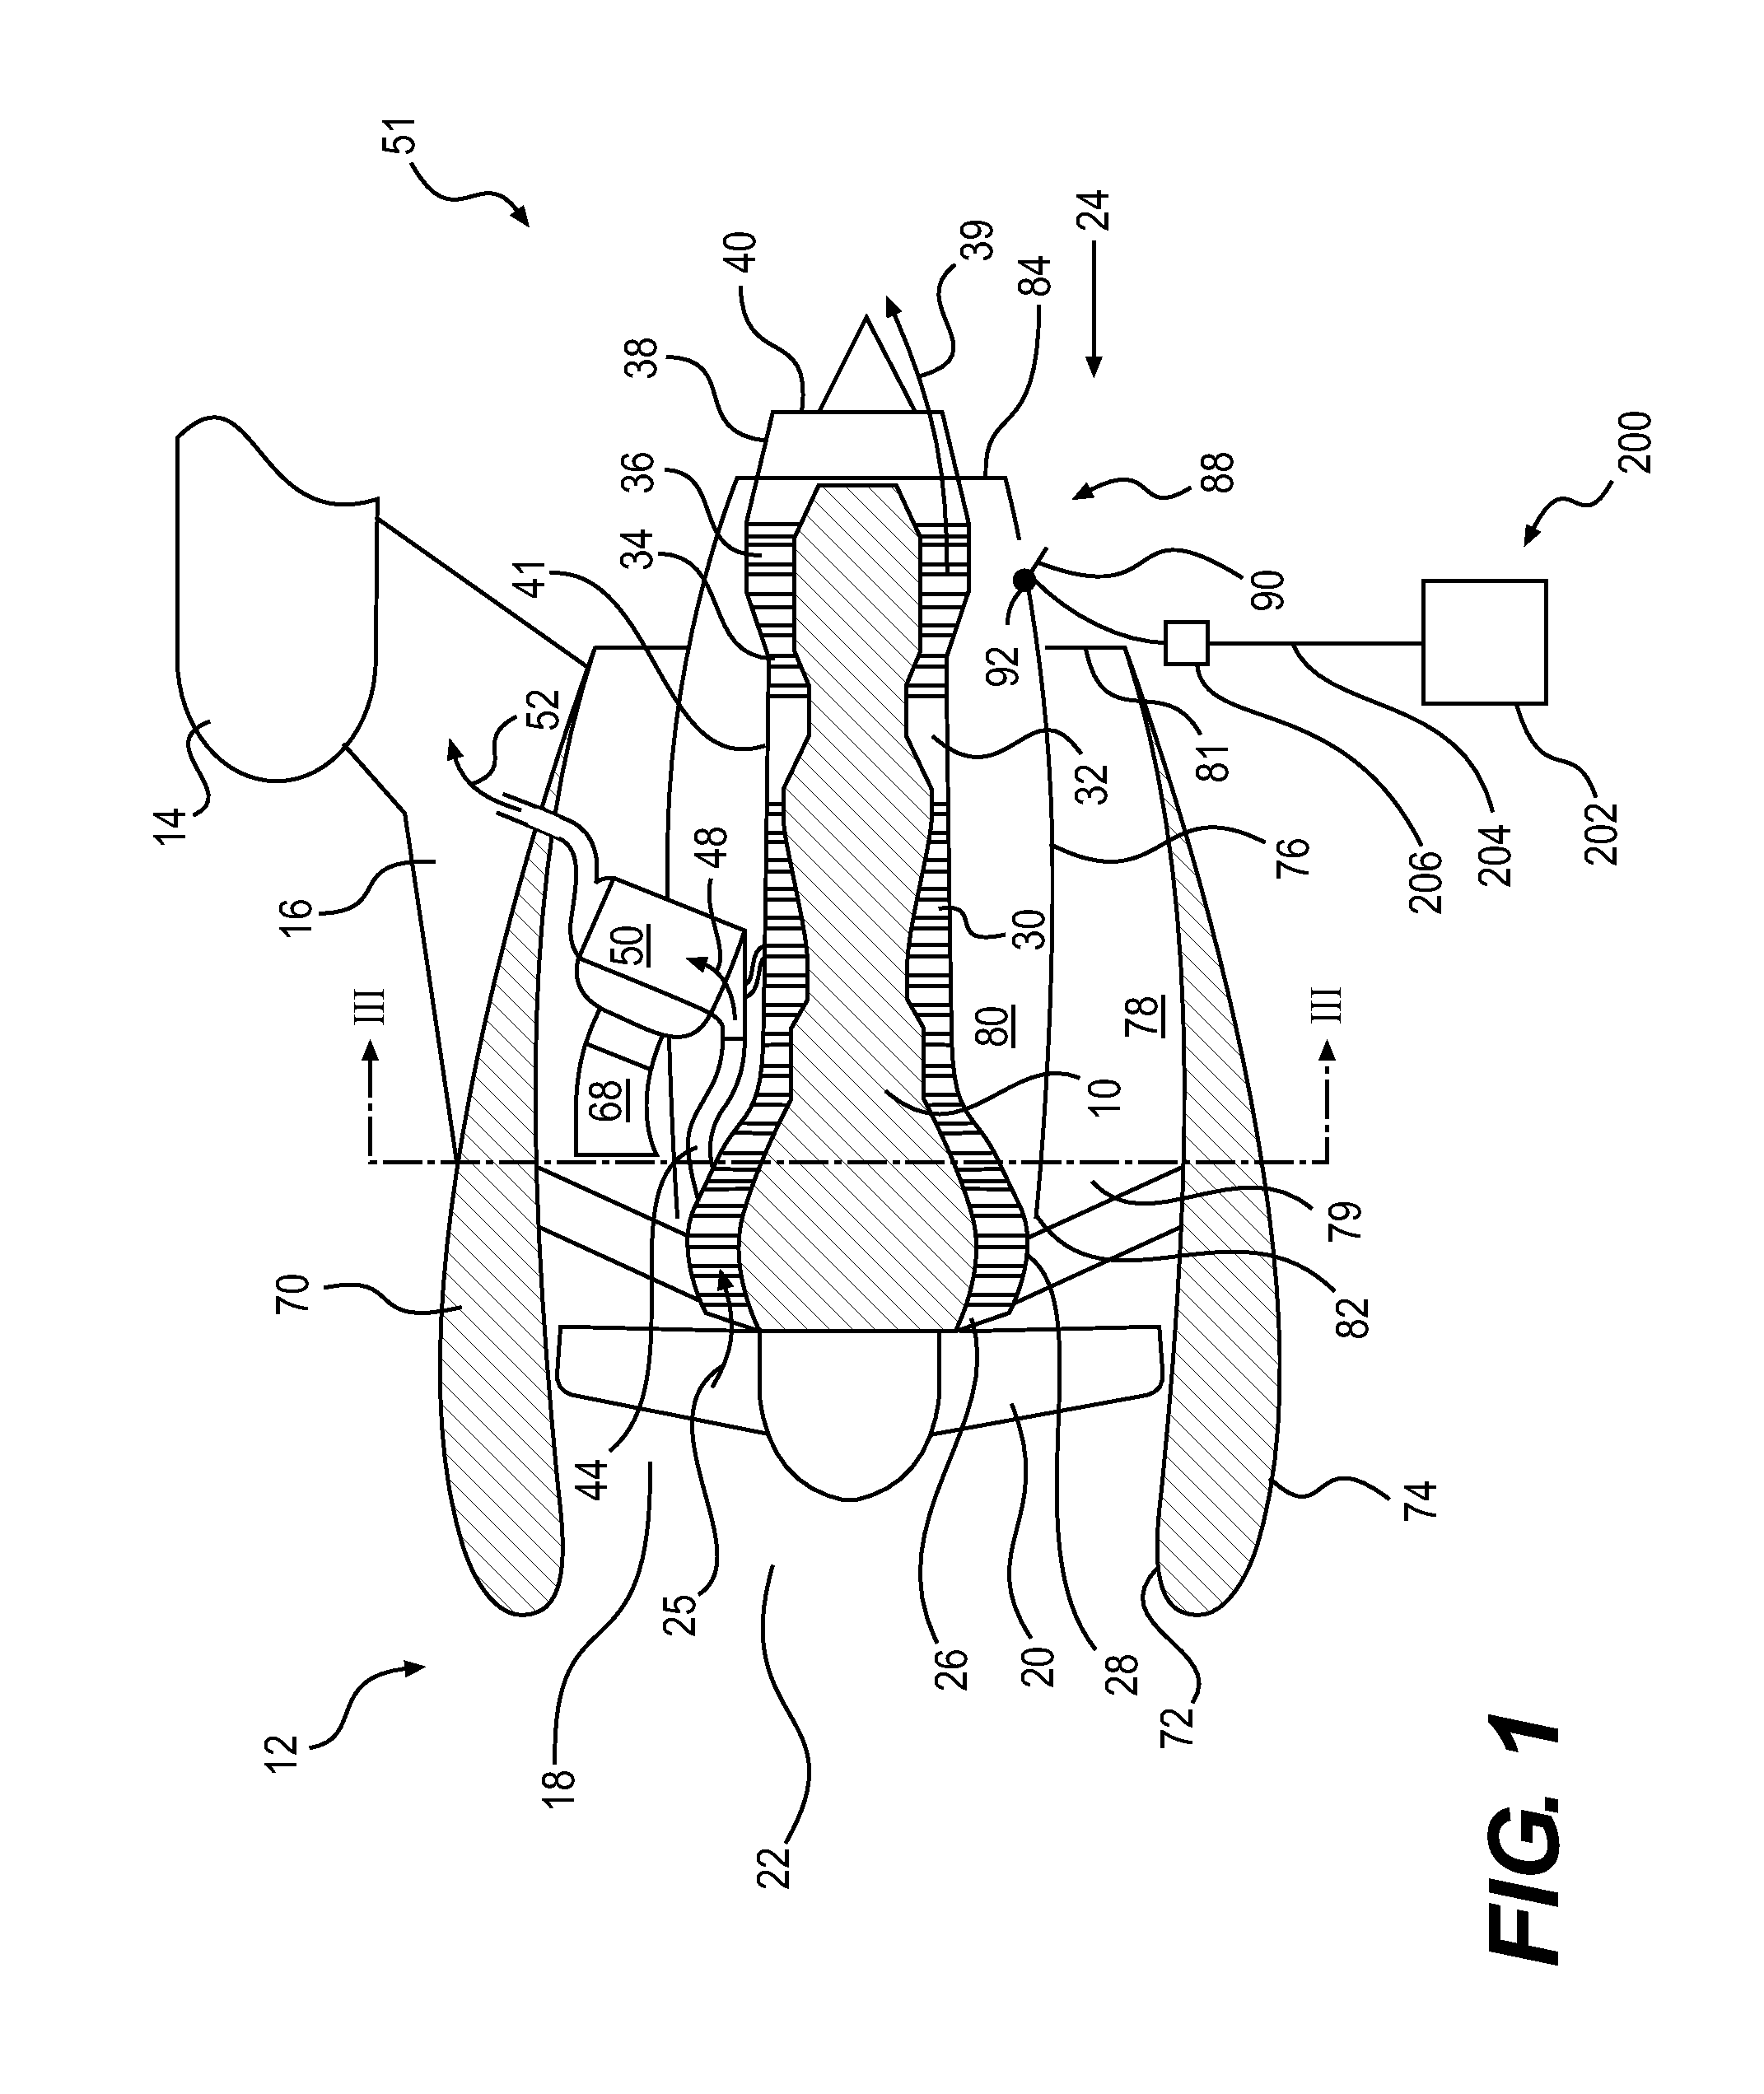 System and method for operating a precooler in an aircraft